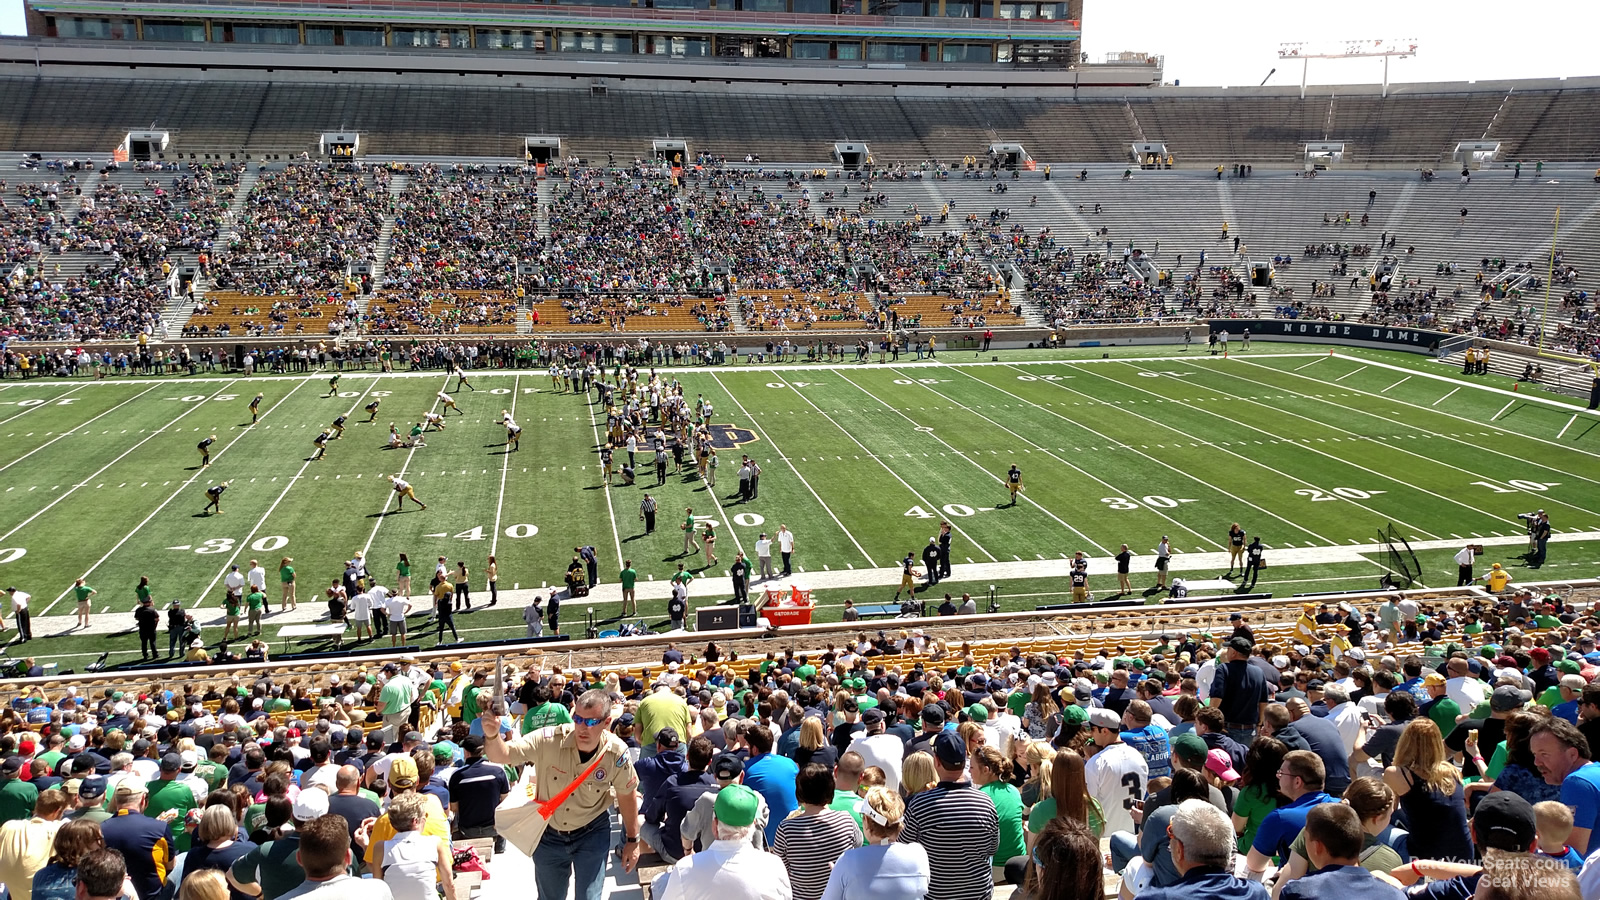 section 28, row 52 seat view  - notre dame stadium